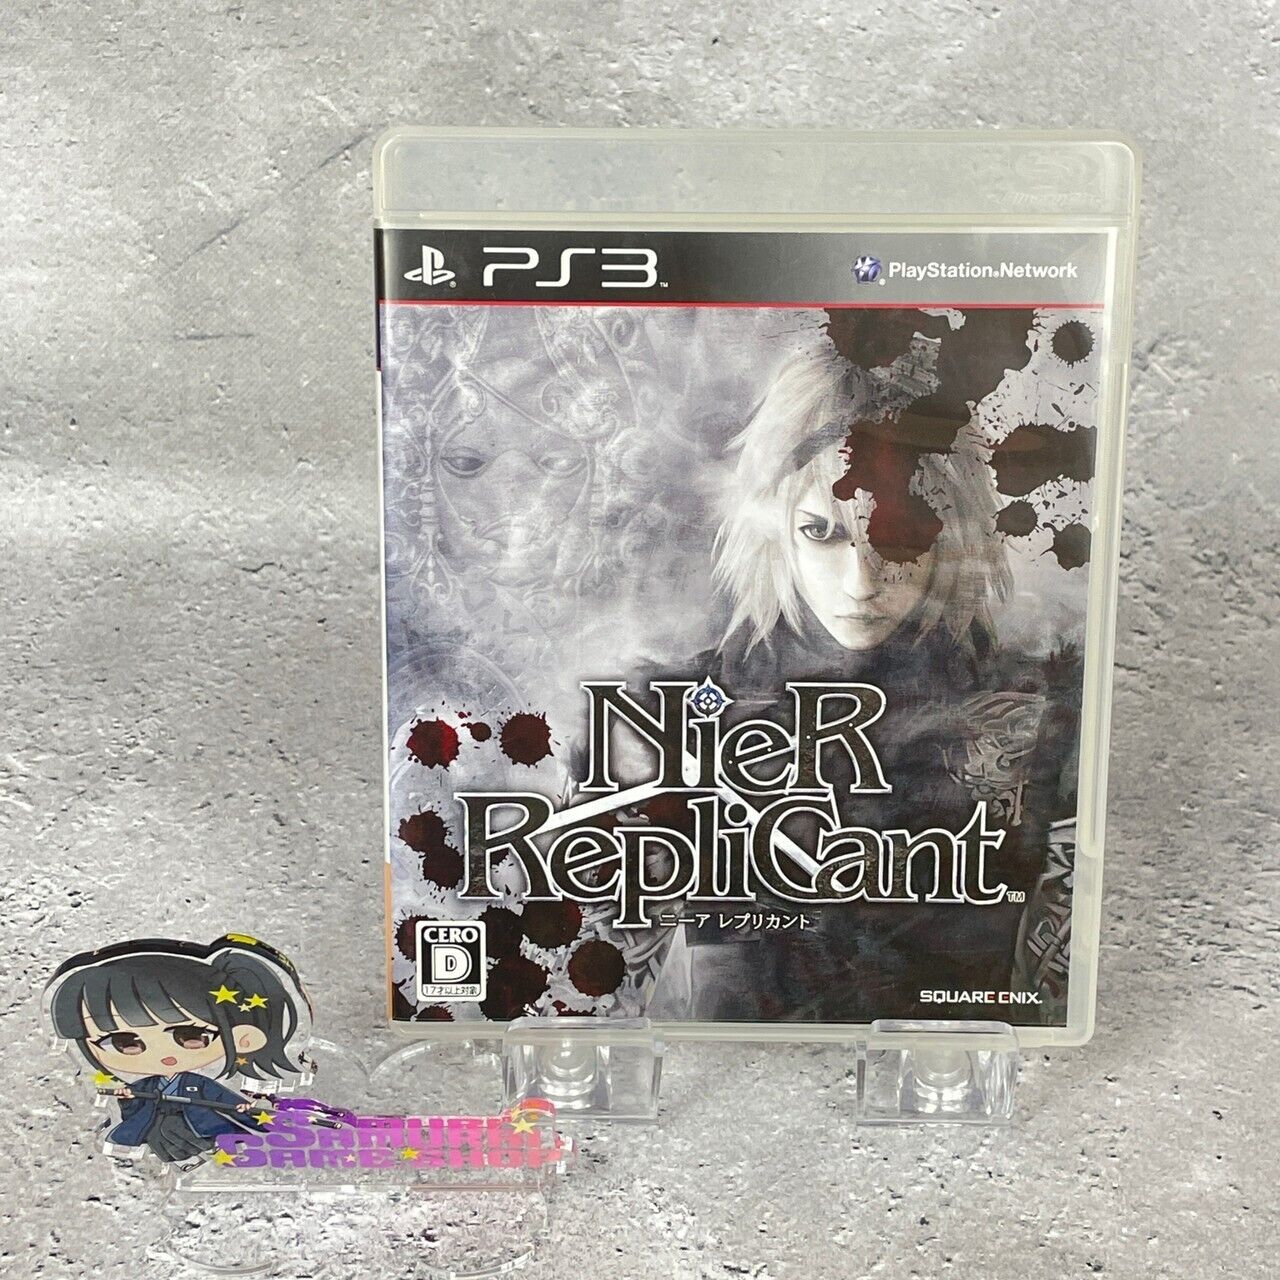 PS3 Nier Replicant Playstation 3 Japanese Language Edition Game Case Manual set